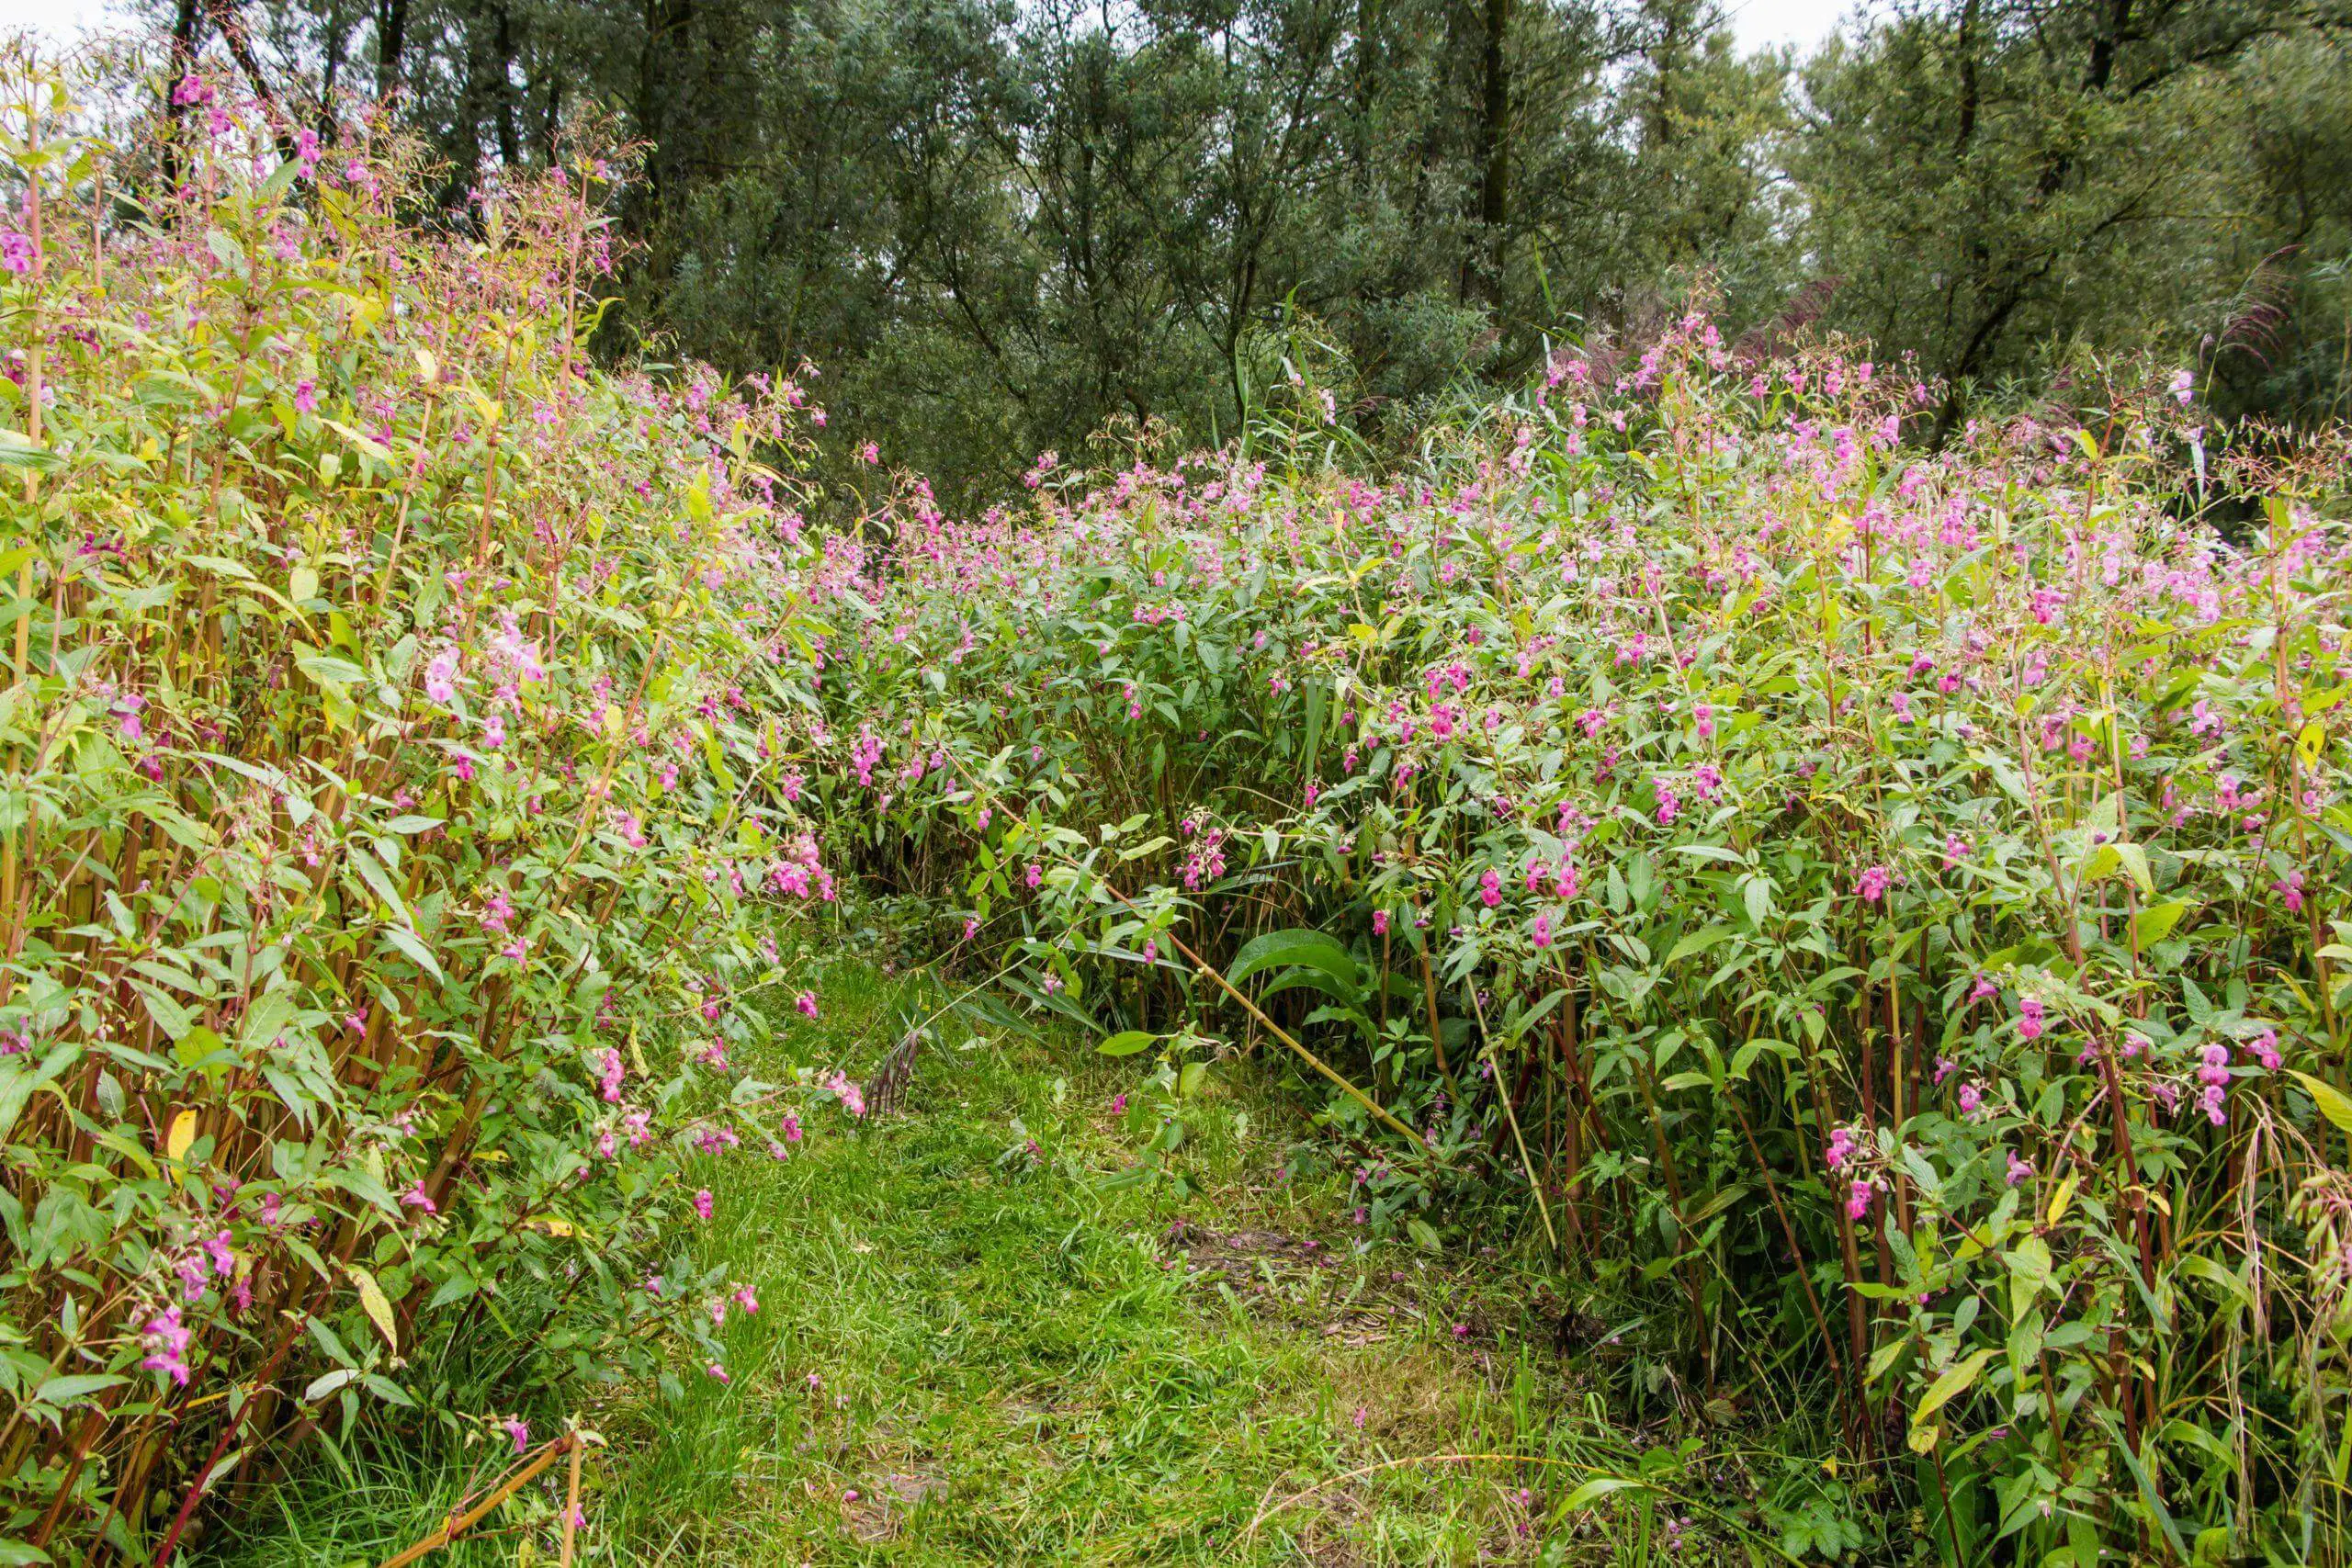 Himalayan Balsam or policemans helmet Impatiens glandulifera in full pink bloom within a garden and only accessible to your pets